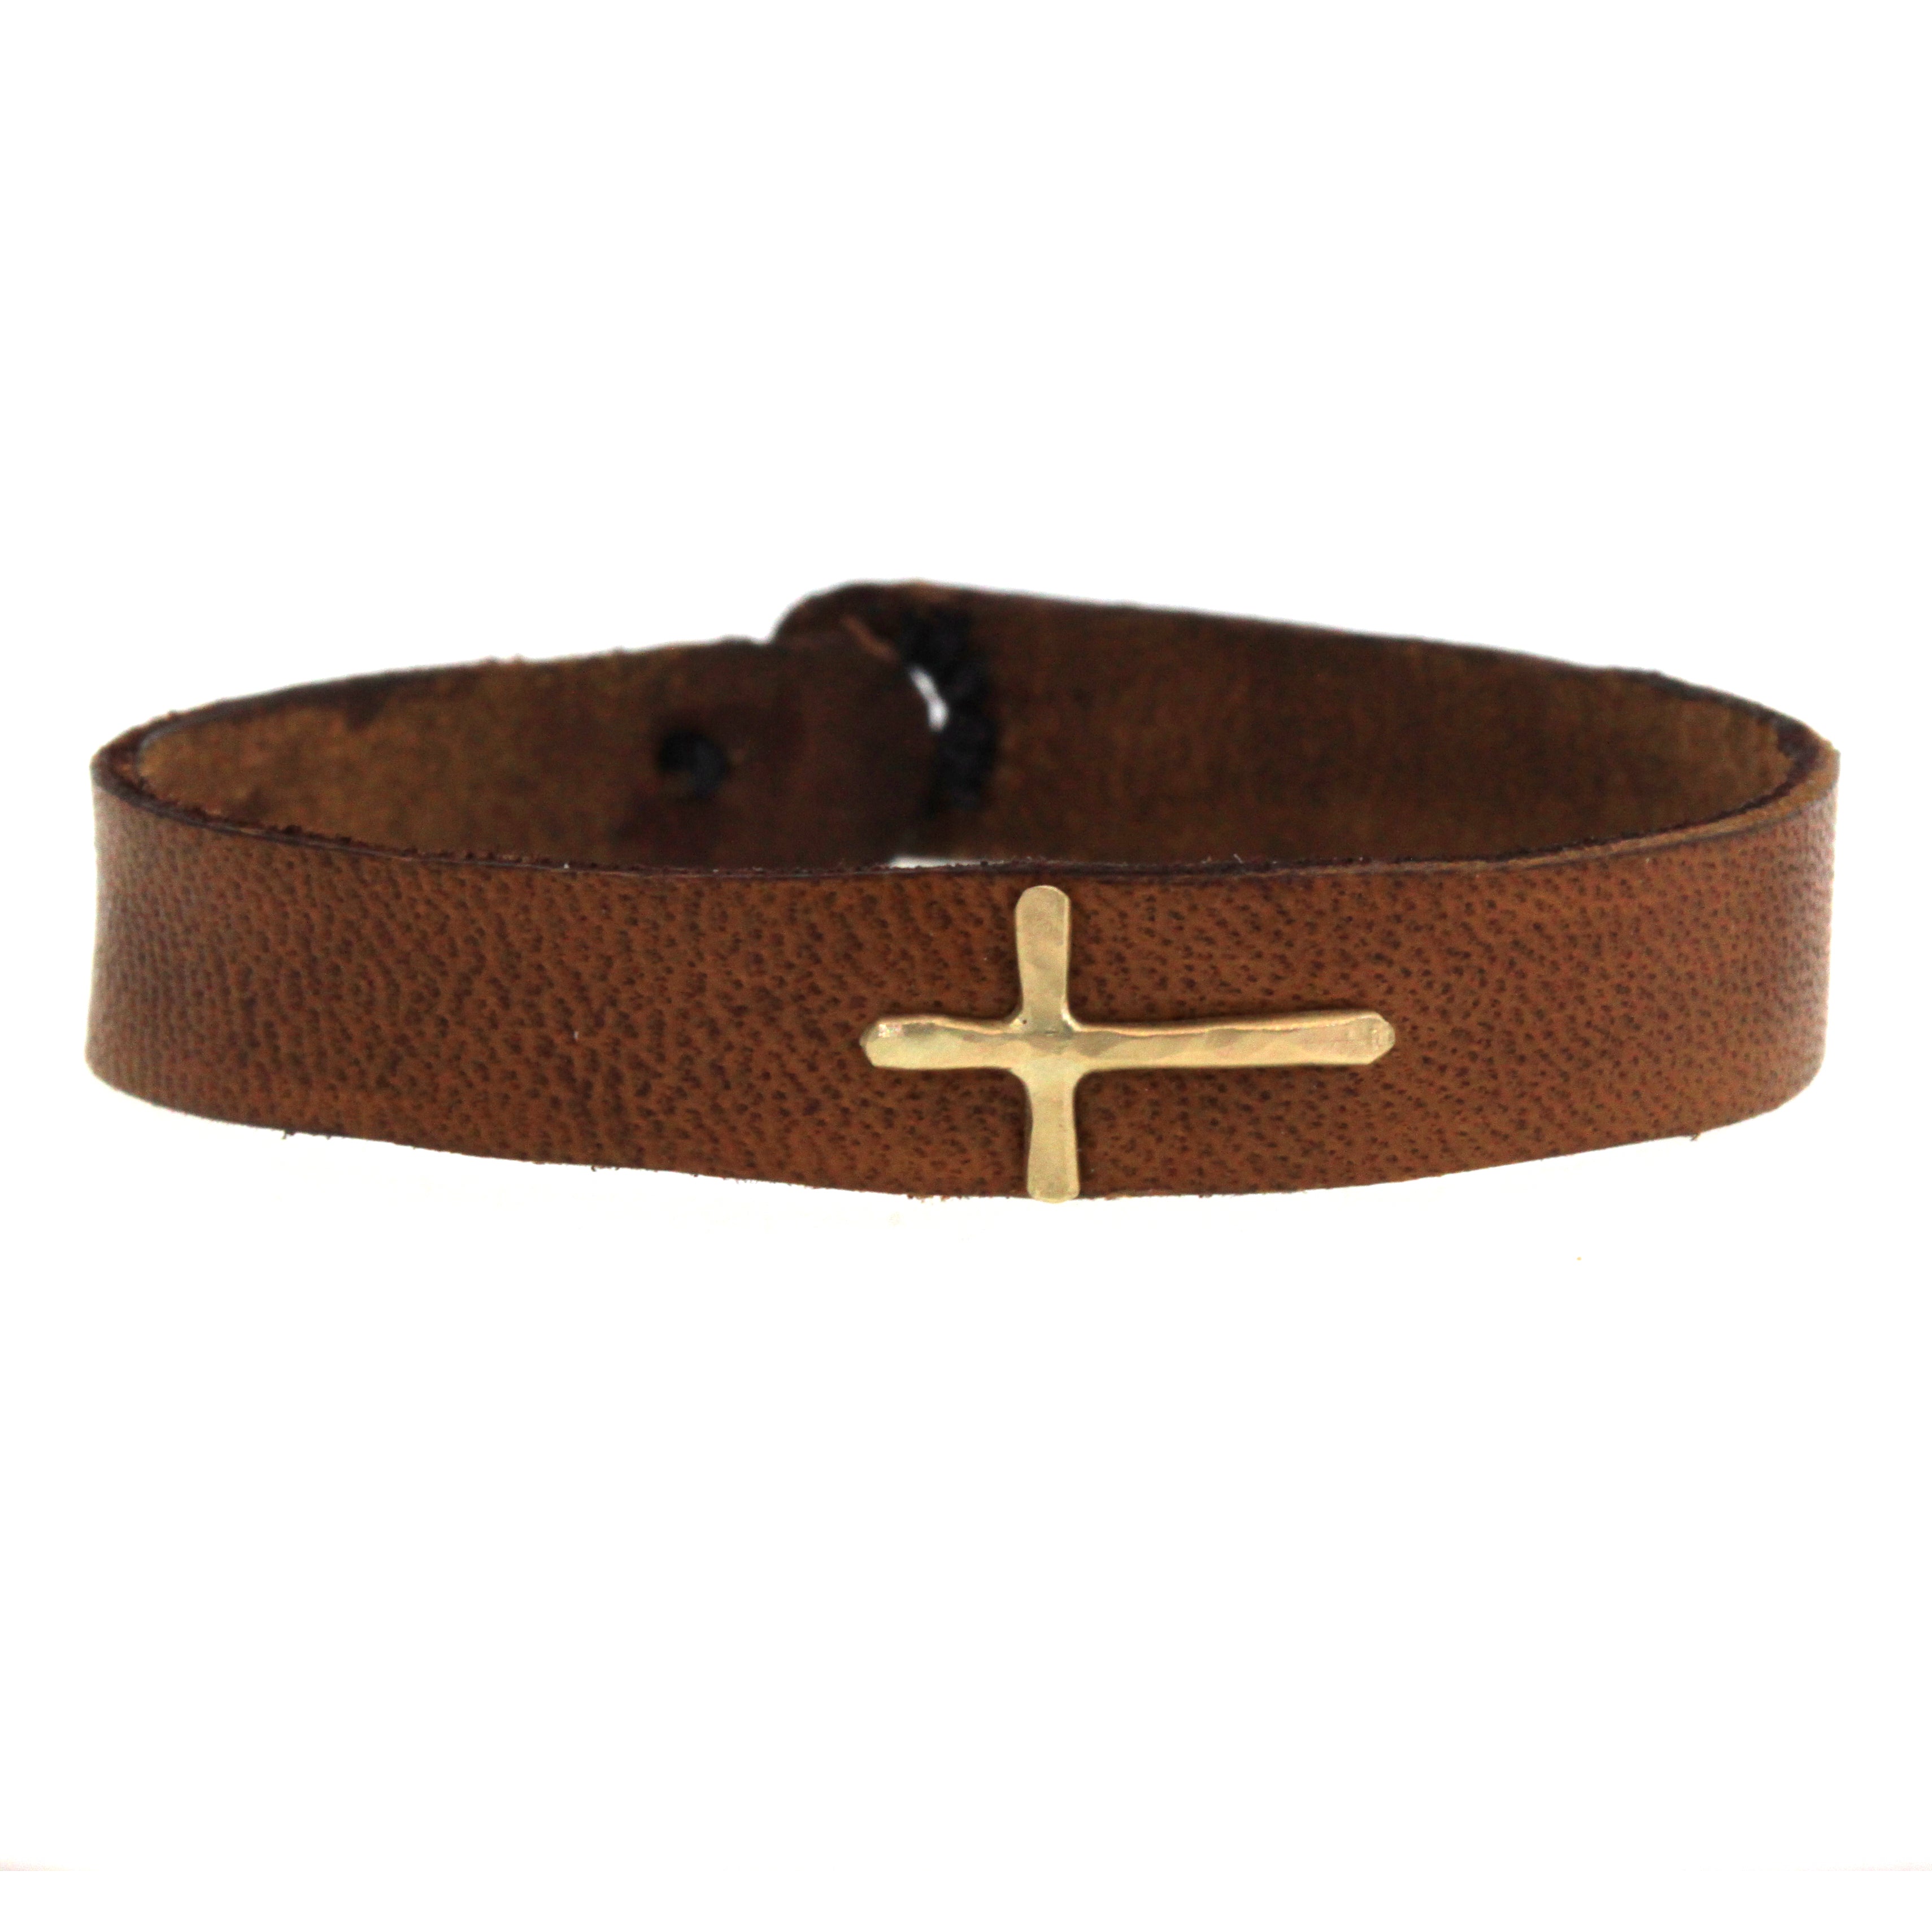 Hand cut and dyed, this gold cross leather bracelet is made to order at Rebecca Lankford Designs in Houston Heights.